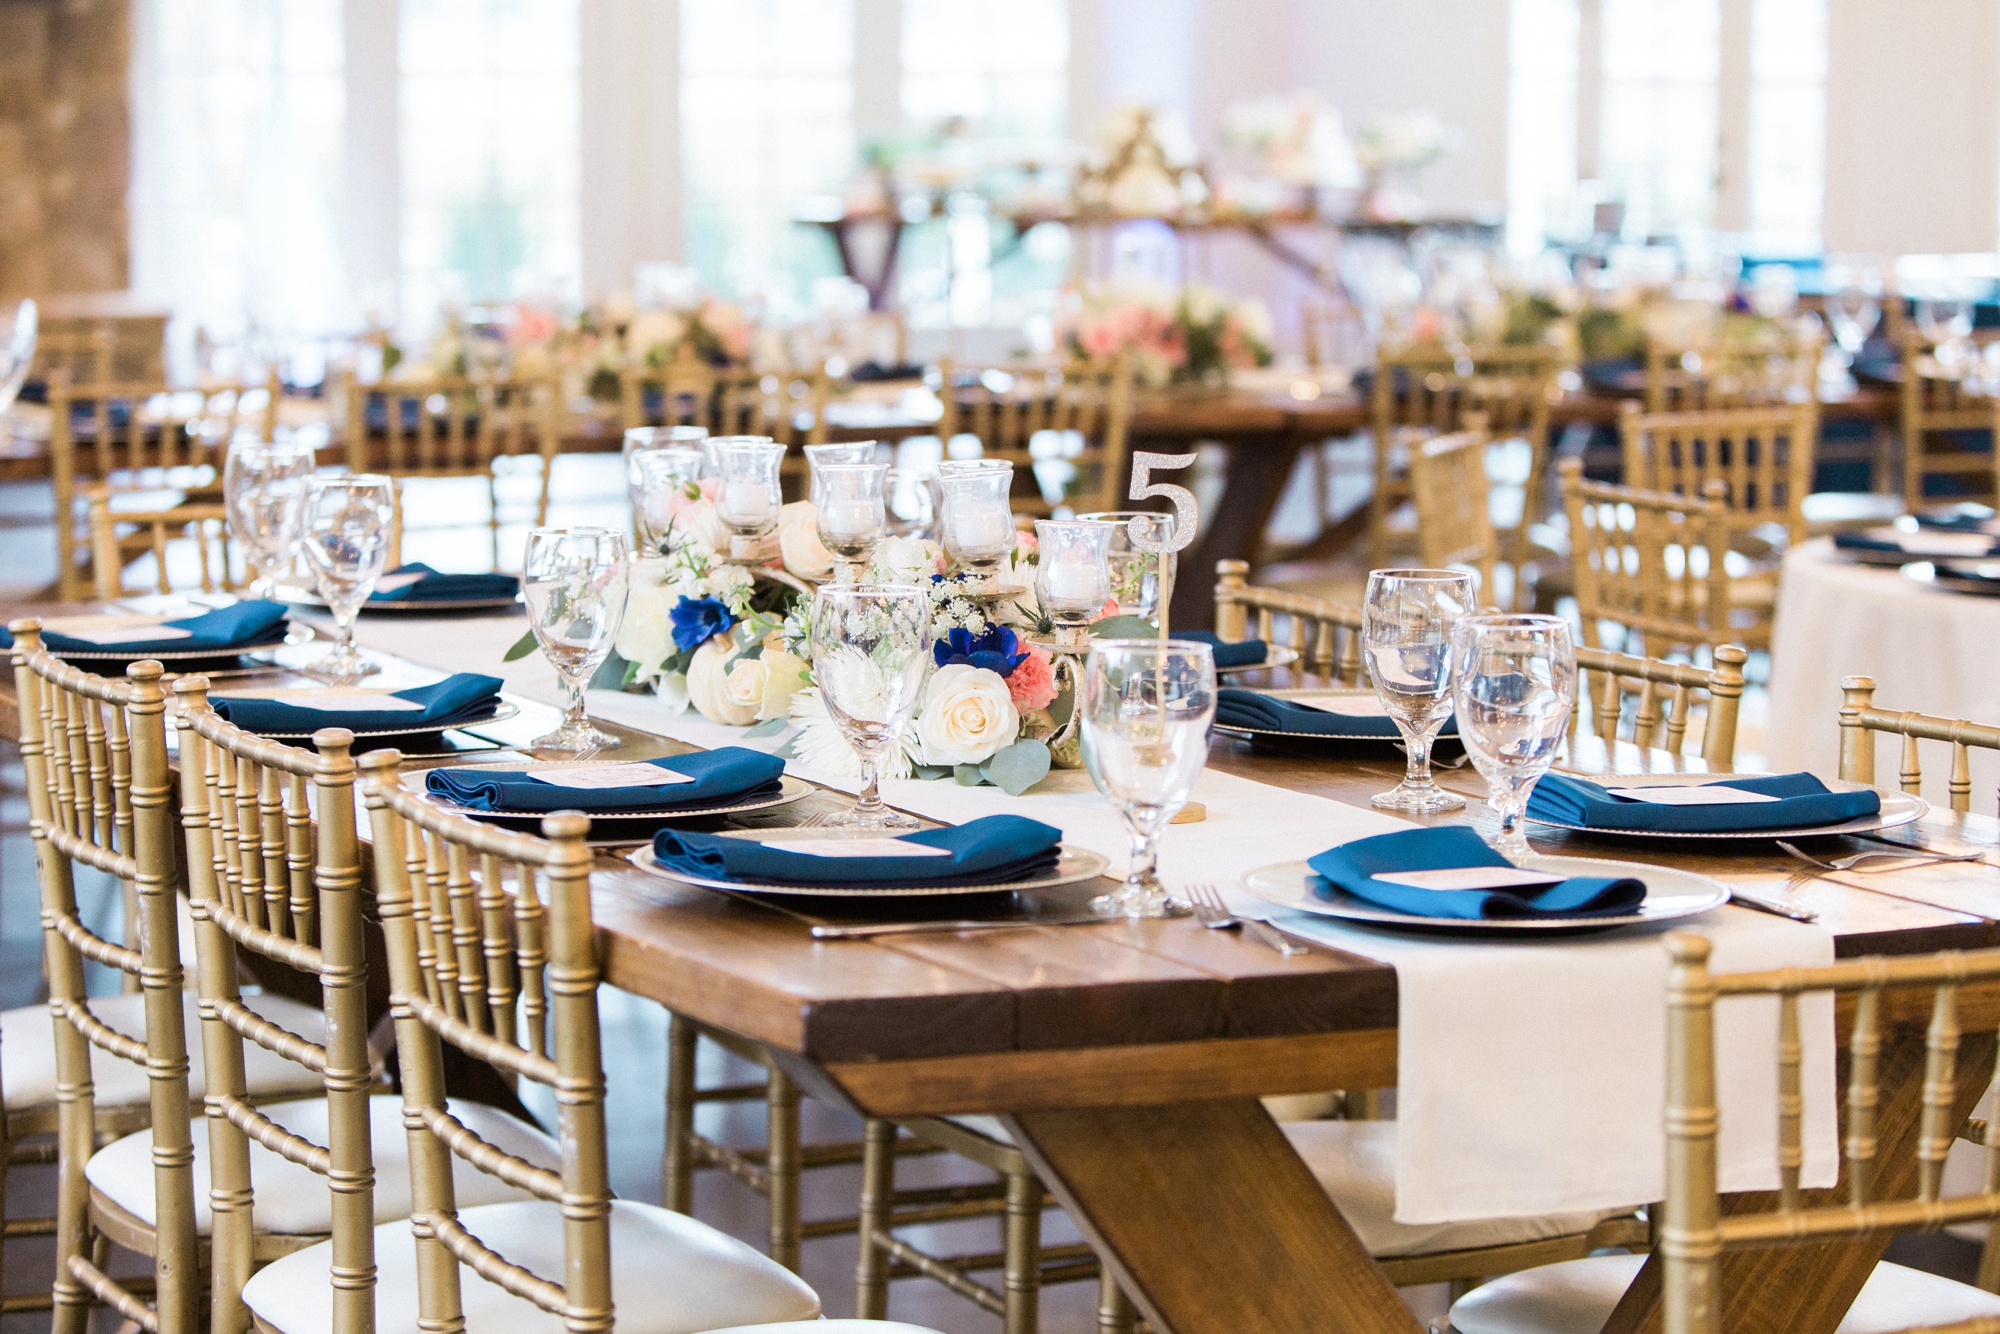 Rustic chic table scapes set the tone for this reception at Little River Farms.